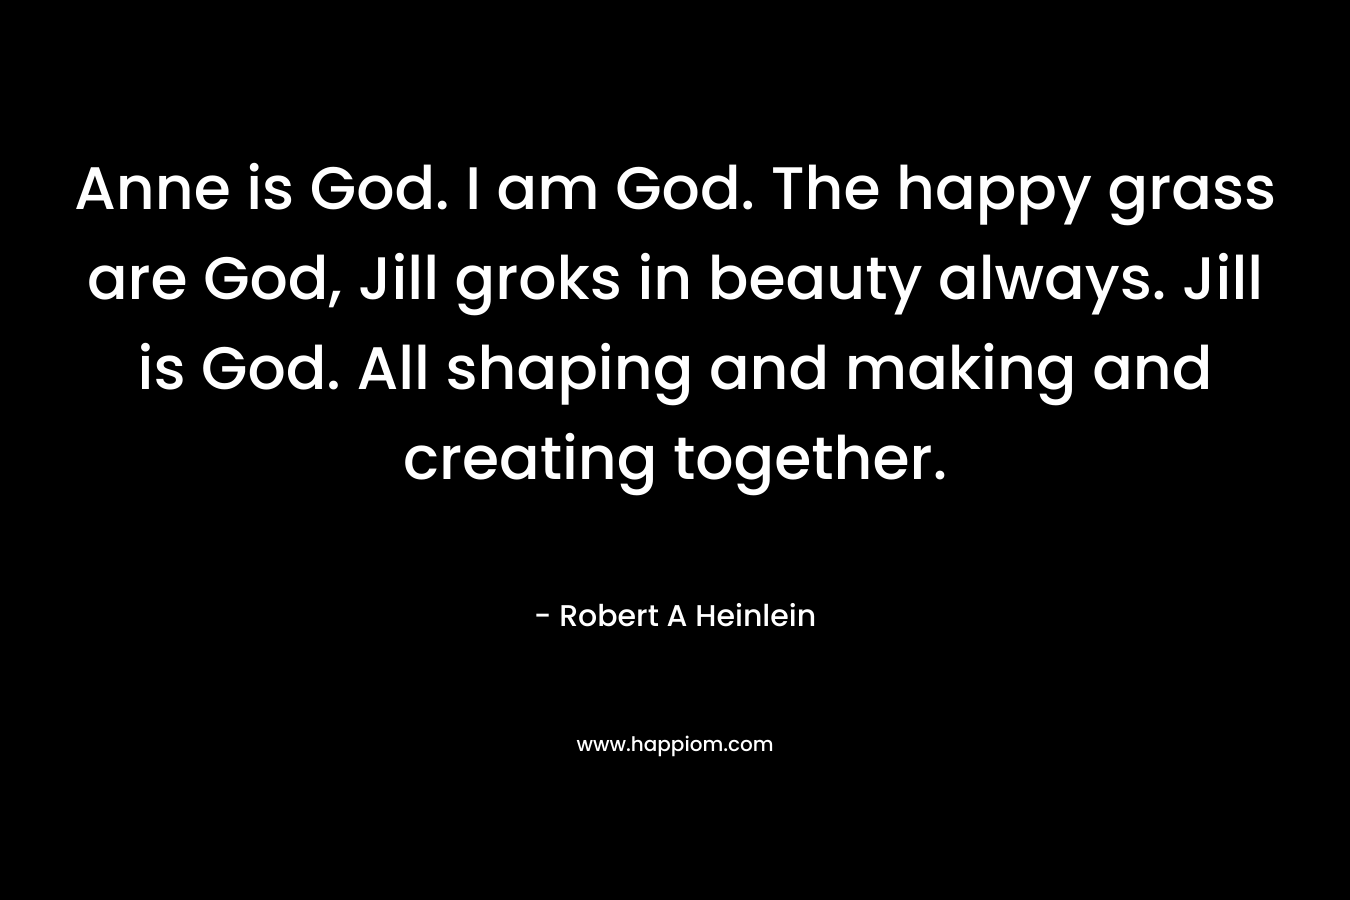 Anne is God. I am God. The happy grass are God, Jill groks in beauty always. Jill is God. All shaping and making and creating together. – Robert A Heinlein